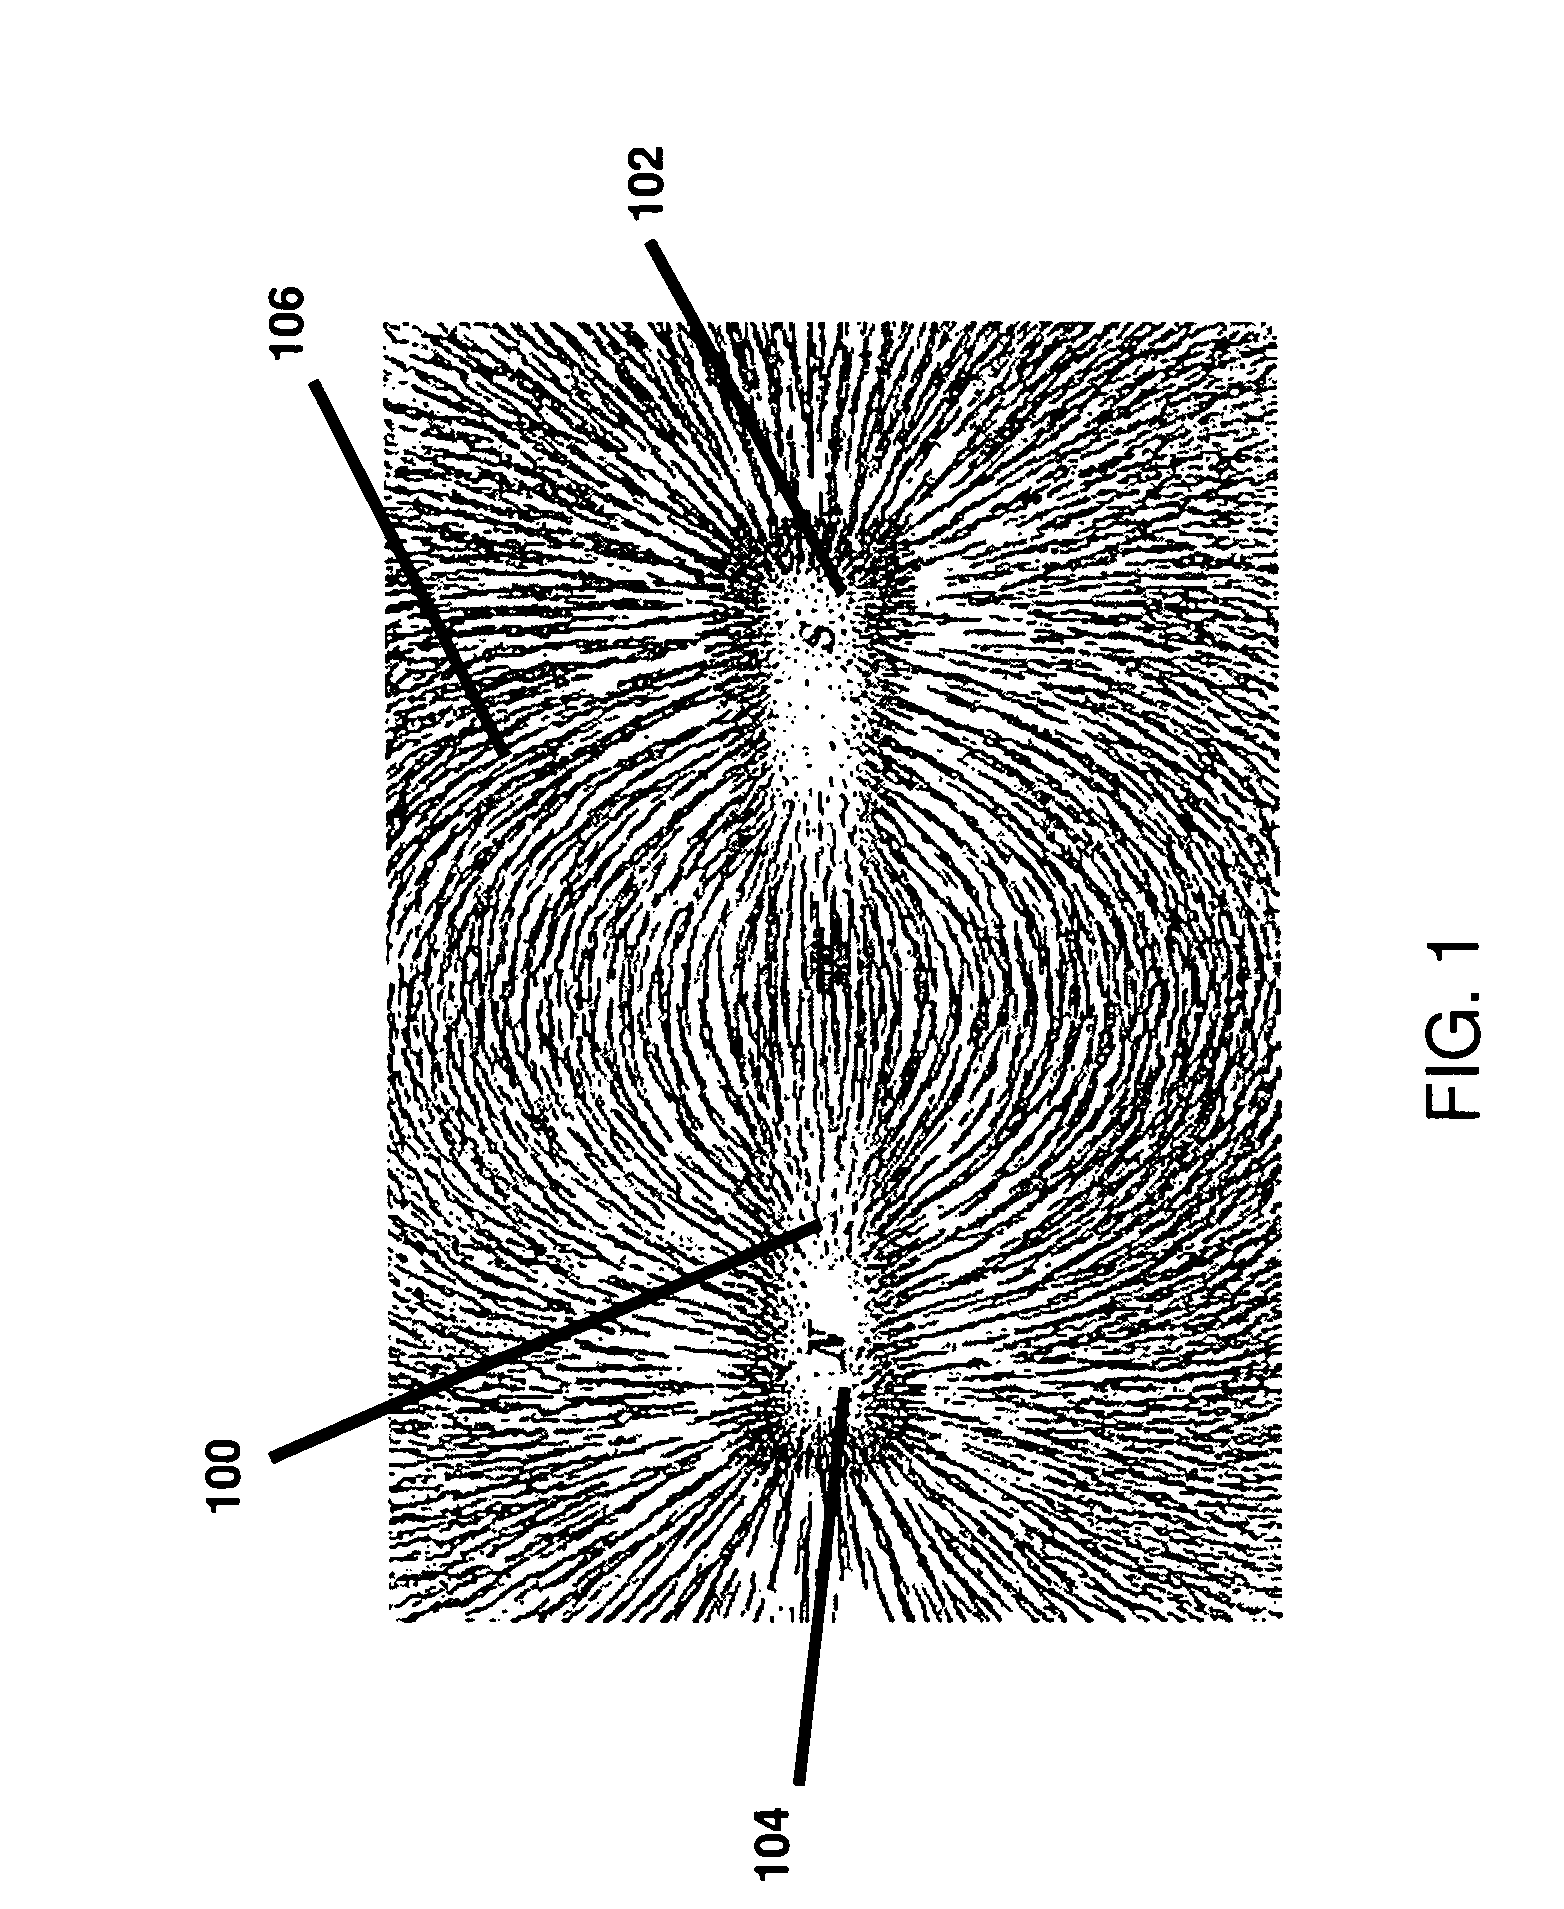 Magnetic force profile system using coded magnet structures